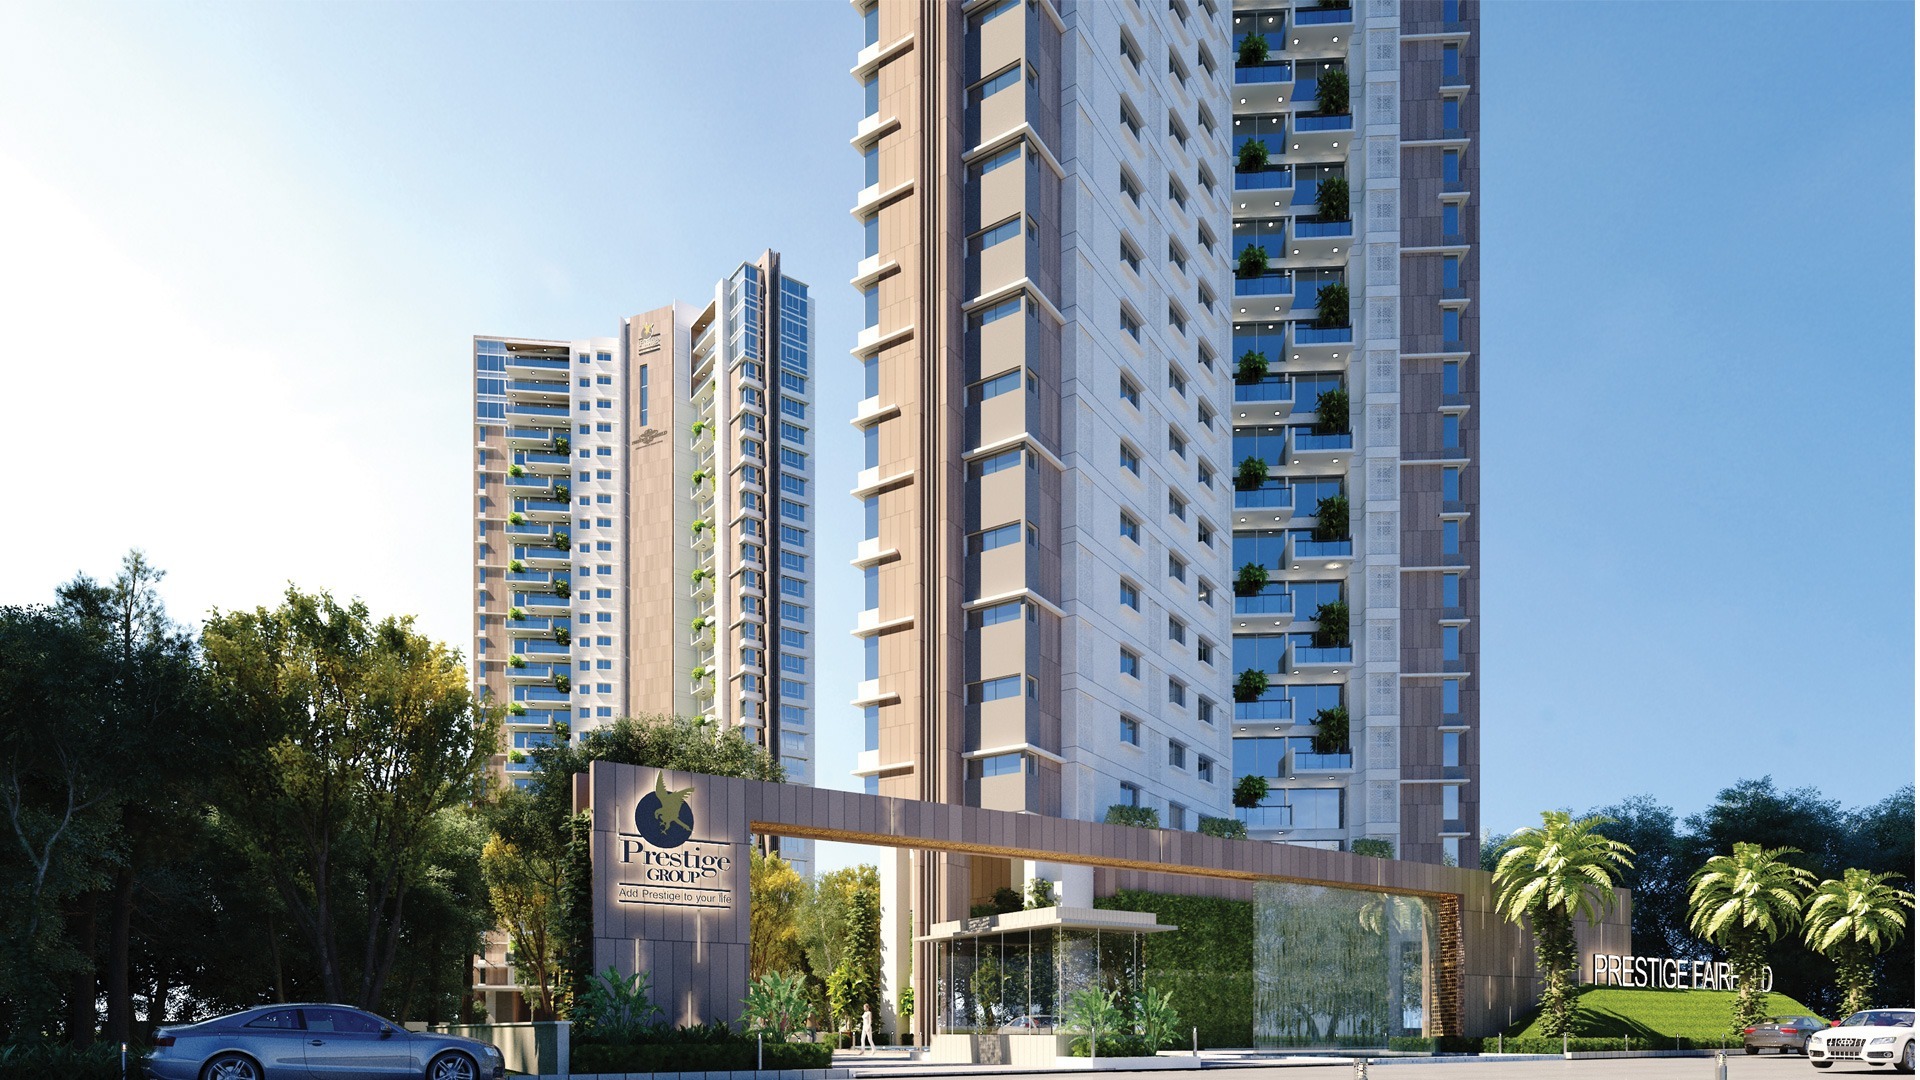 Prestige Palm Court: A Luxurious Oasis in the Heart of the City